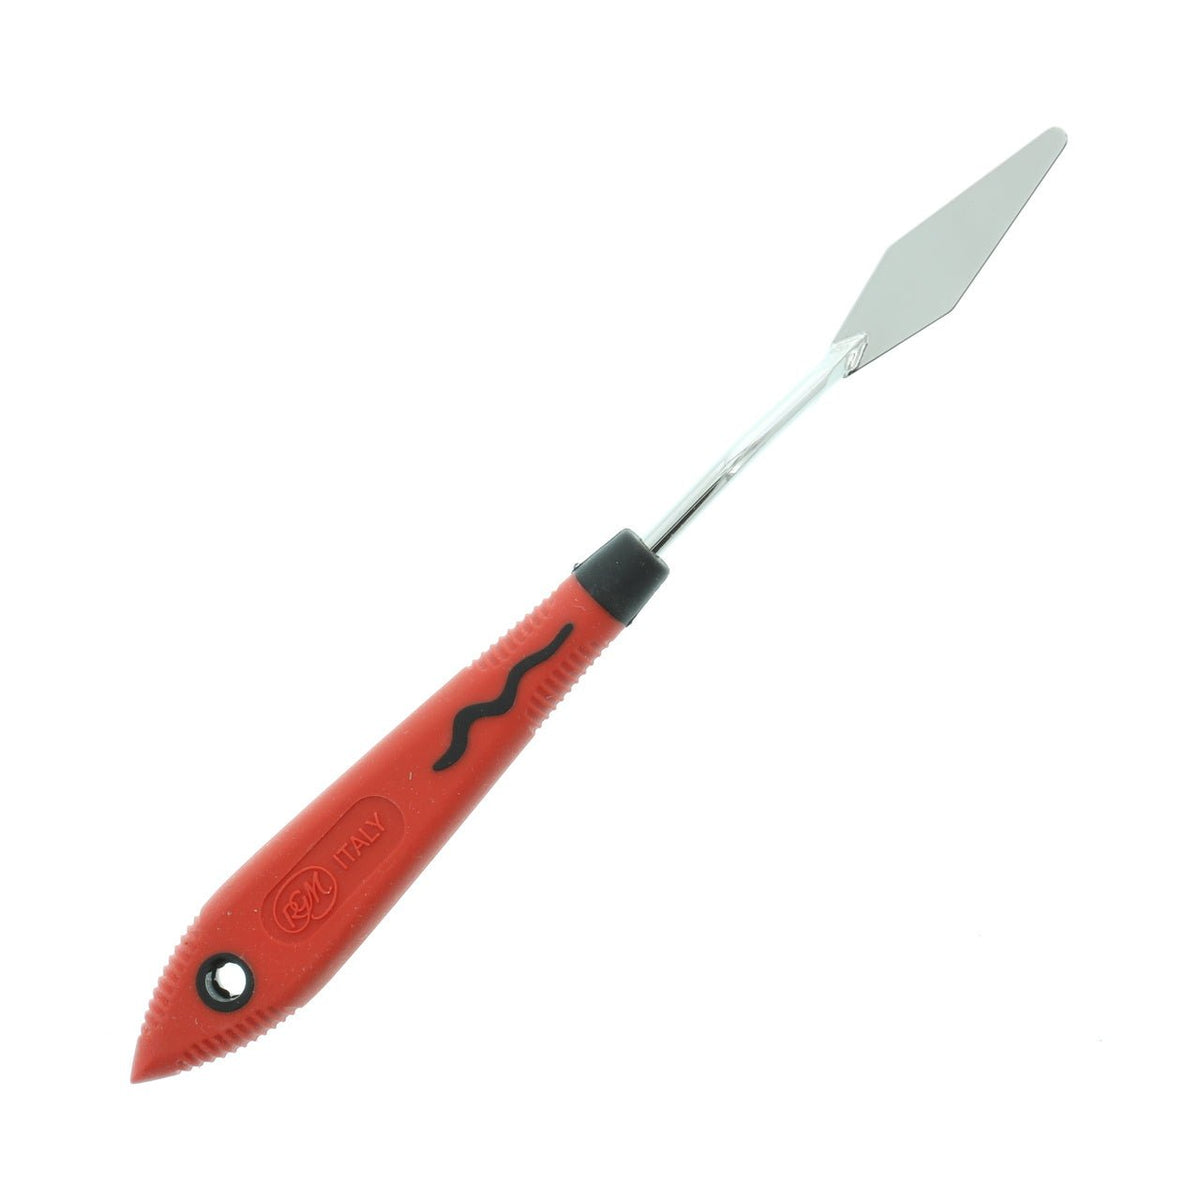 RGM Soft Grip Painting Knife #044 (Red Handle) - merriartist.com